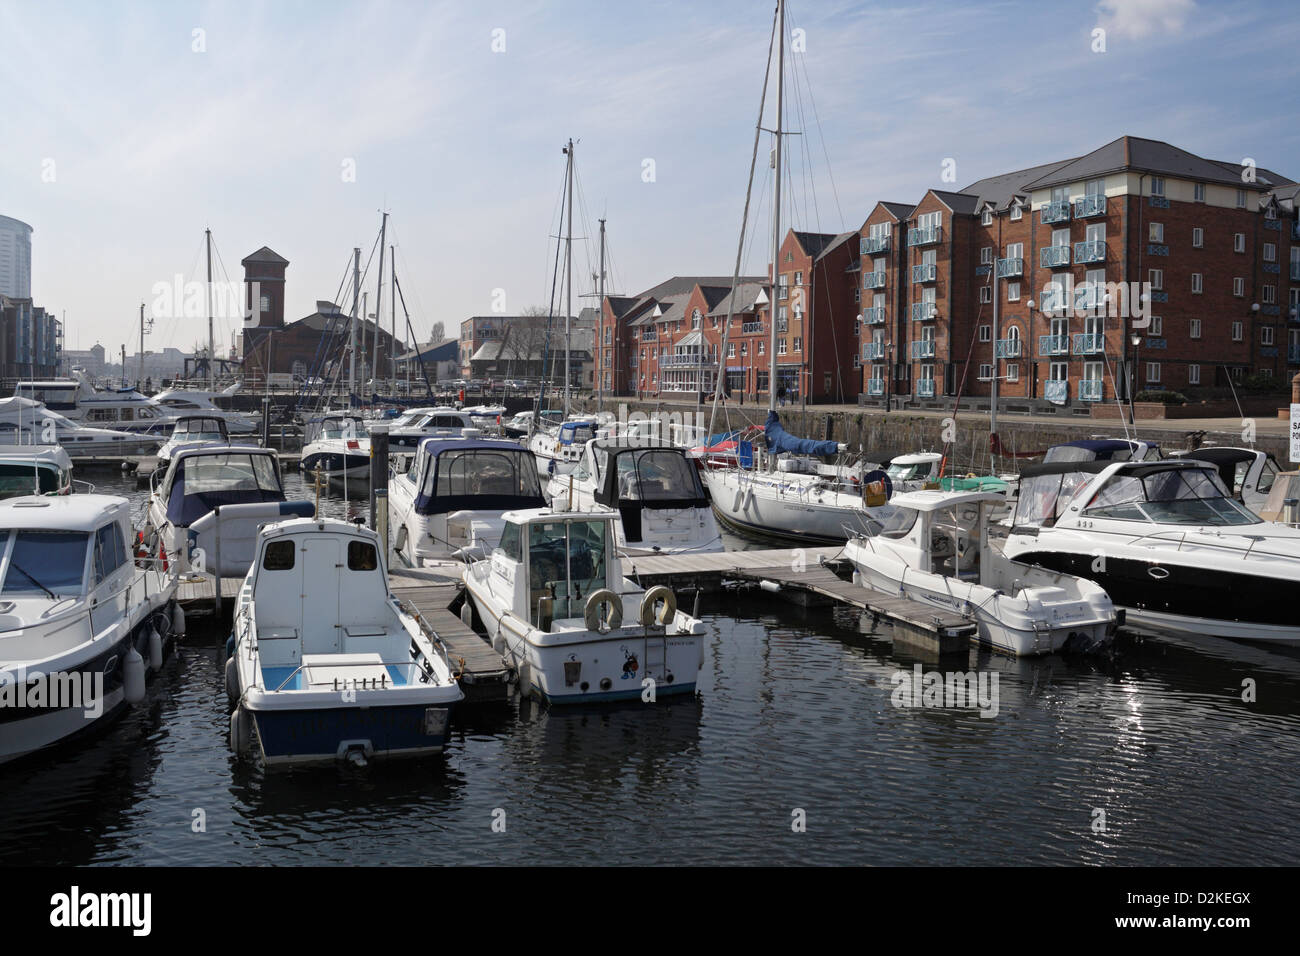 The expanse of Swansea marina in the old town dock, Wales UK Boats moored Swansea waterfront quayside Stock Photo